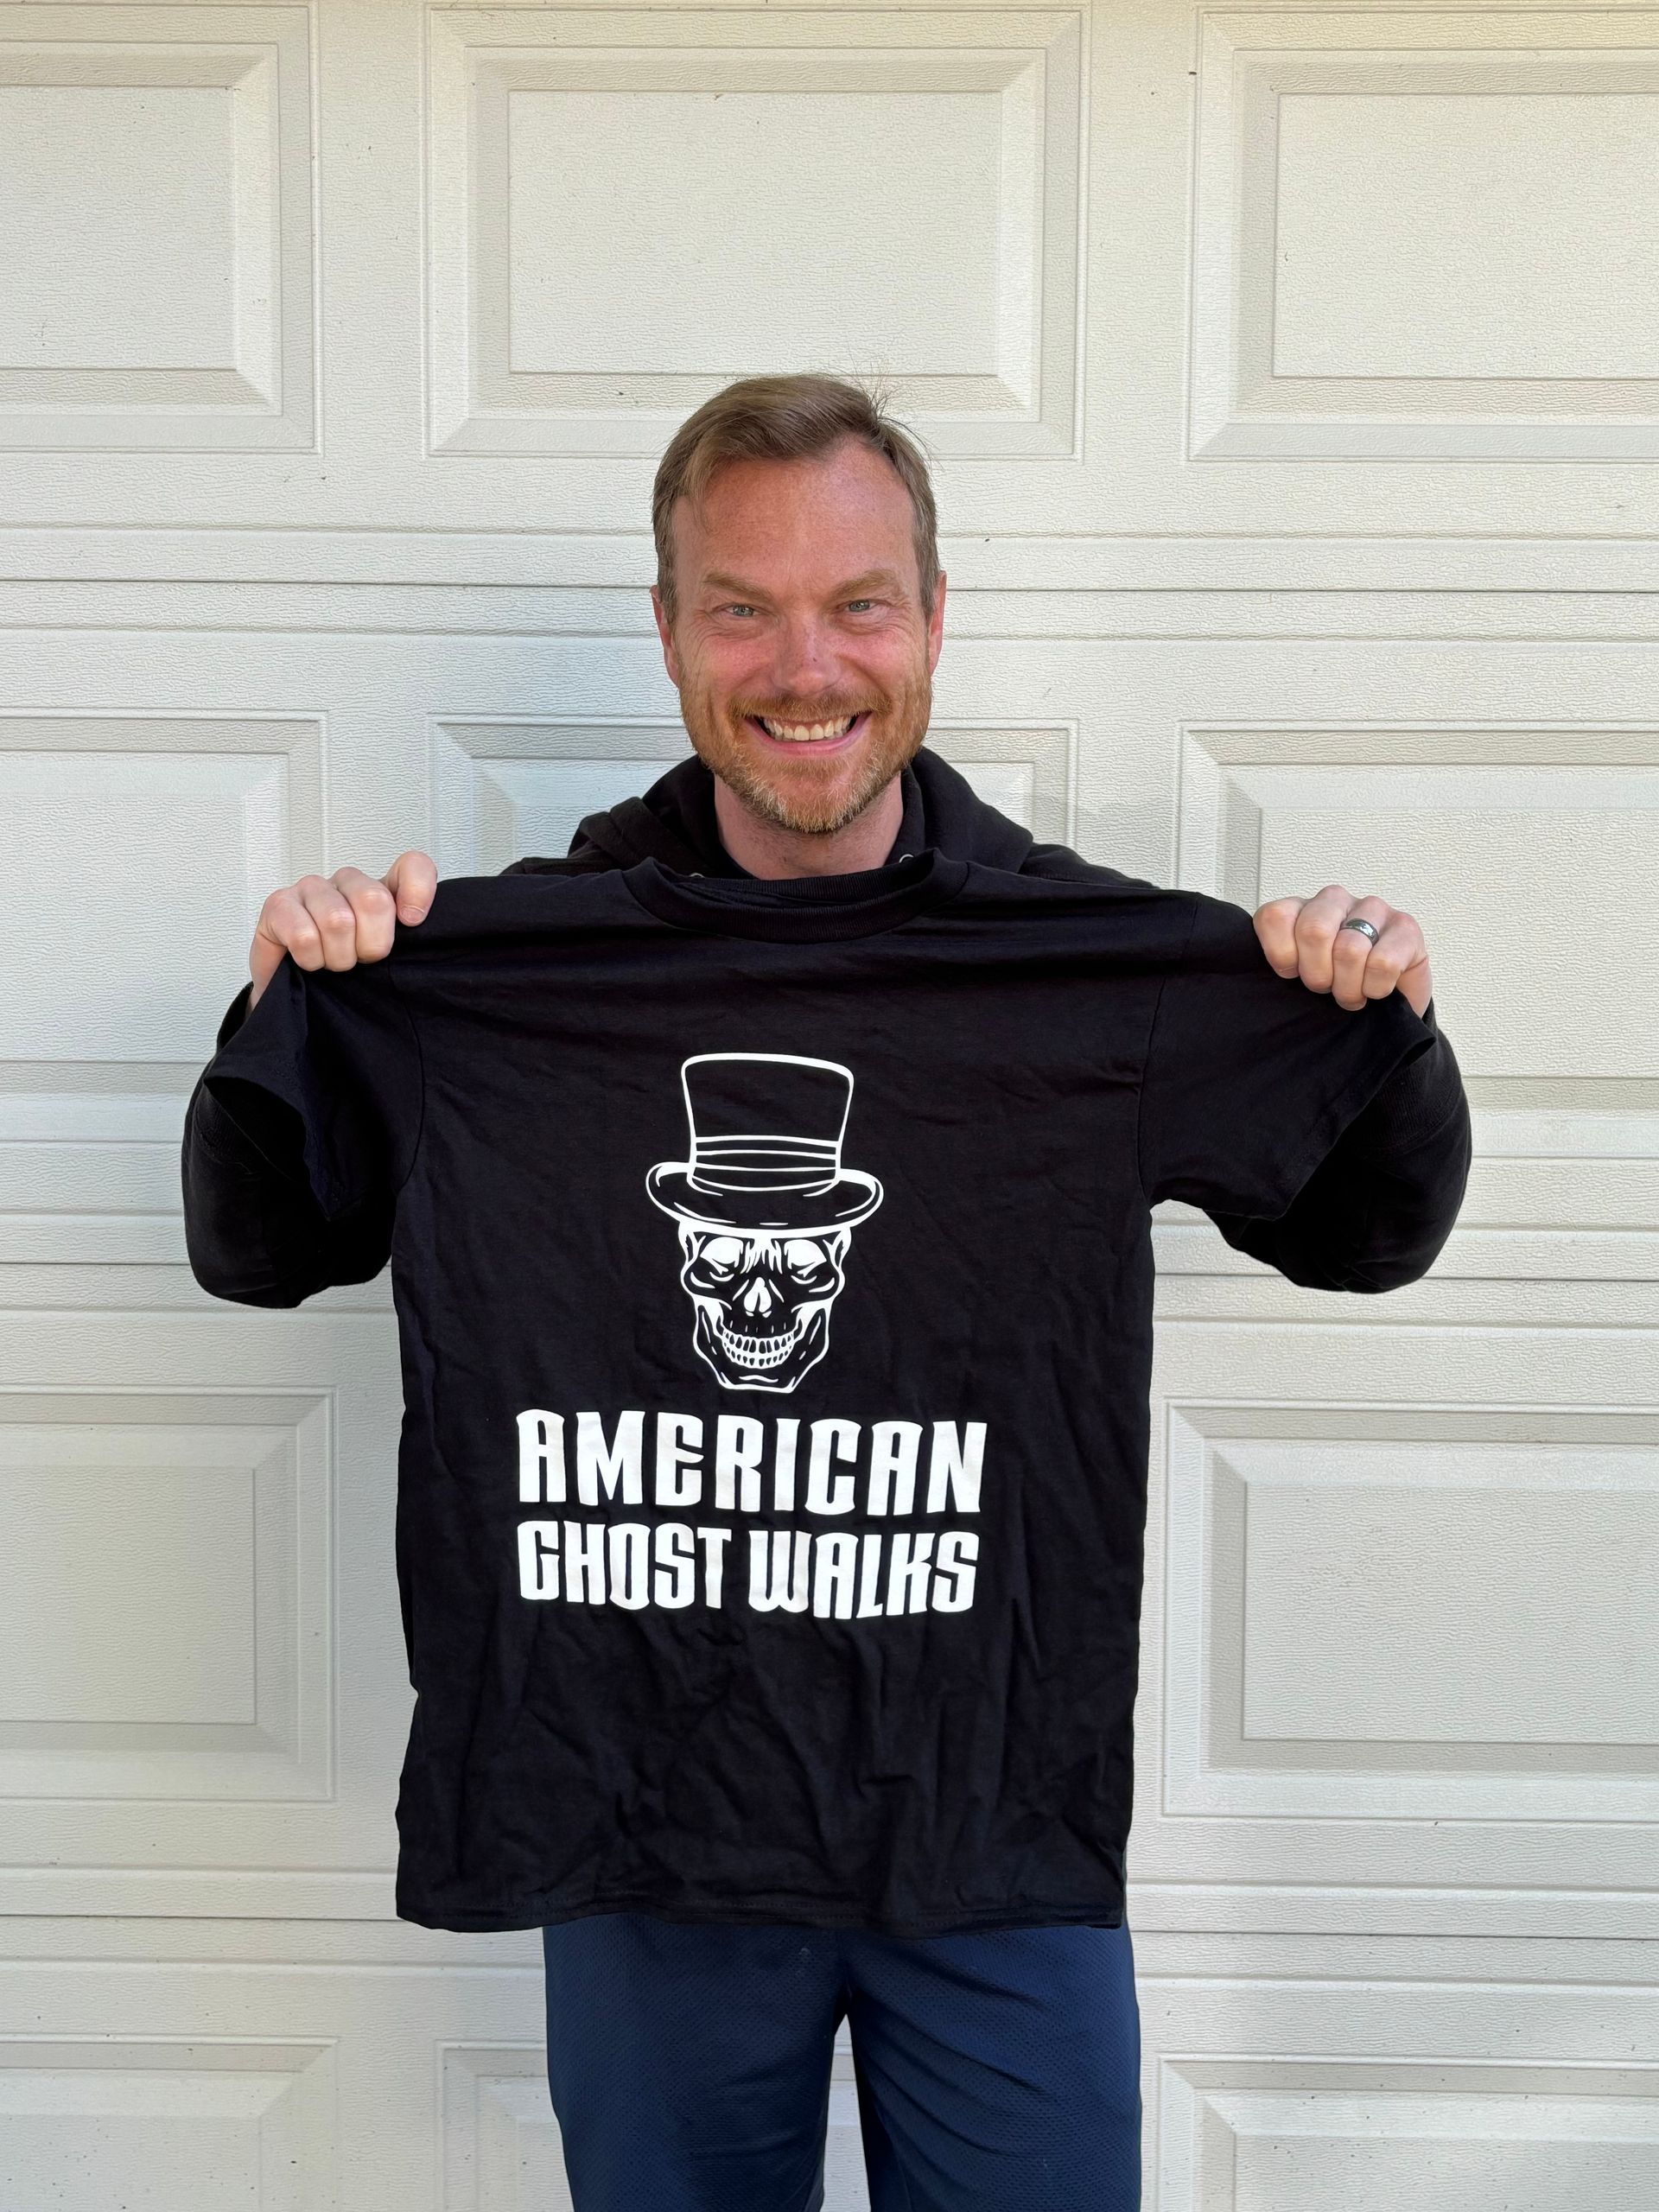 Mike Huberty holding an American Ghost Walks t-shirt